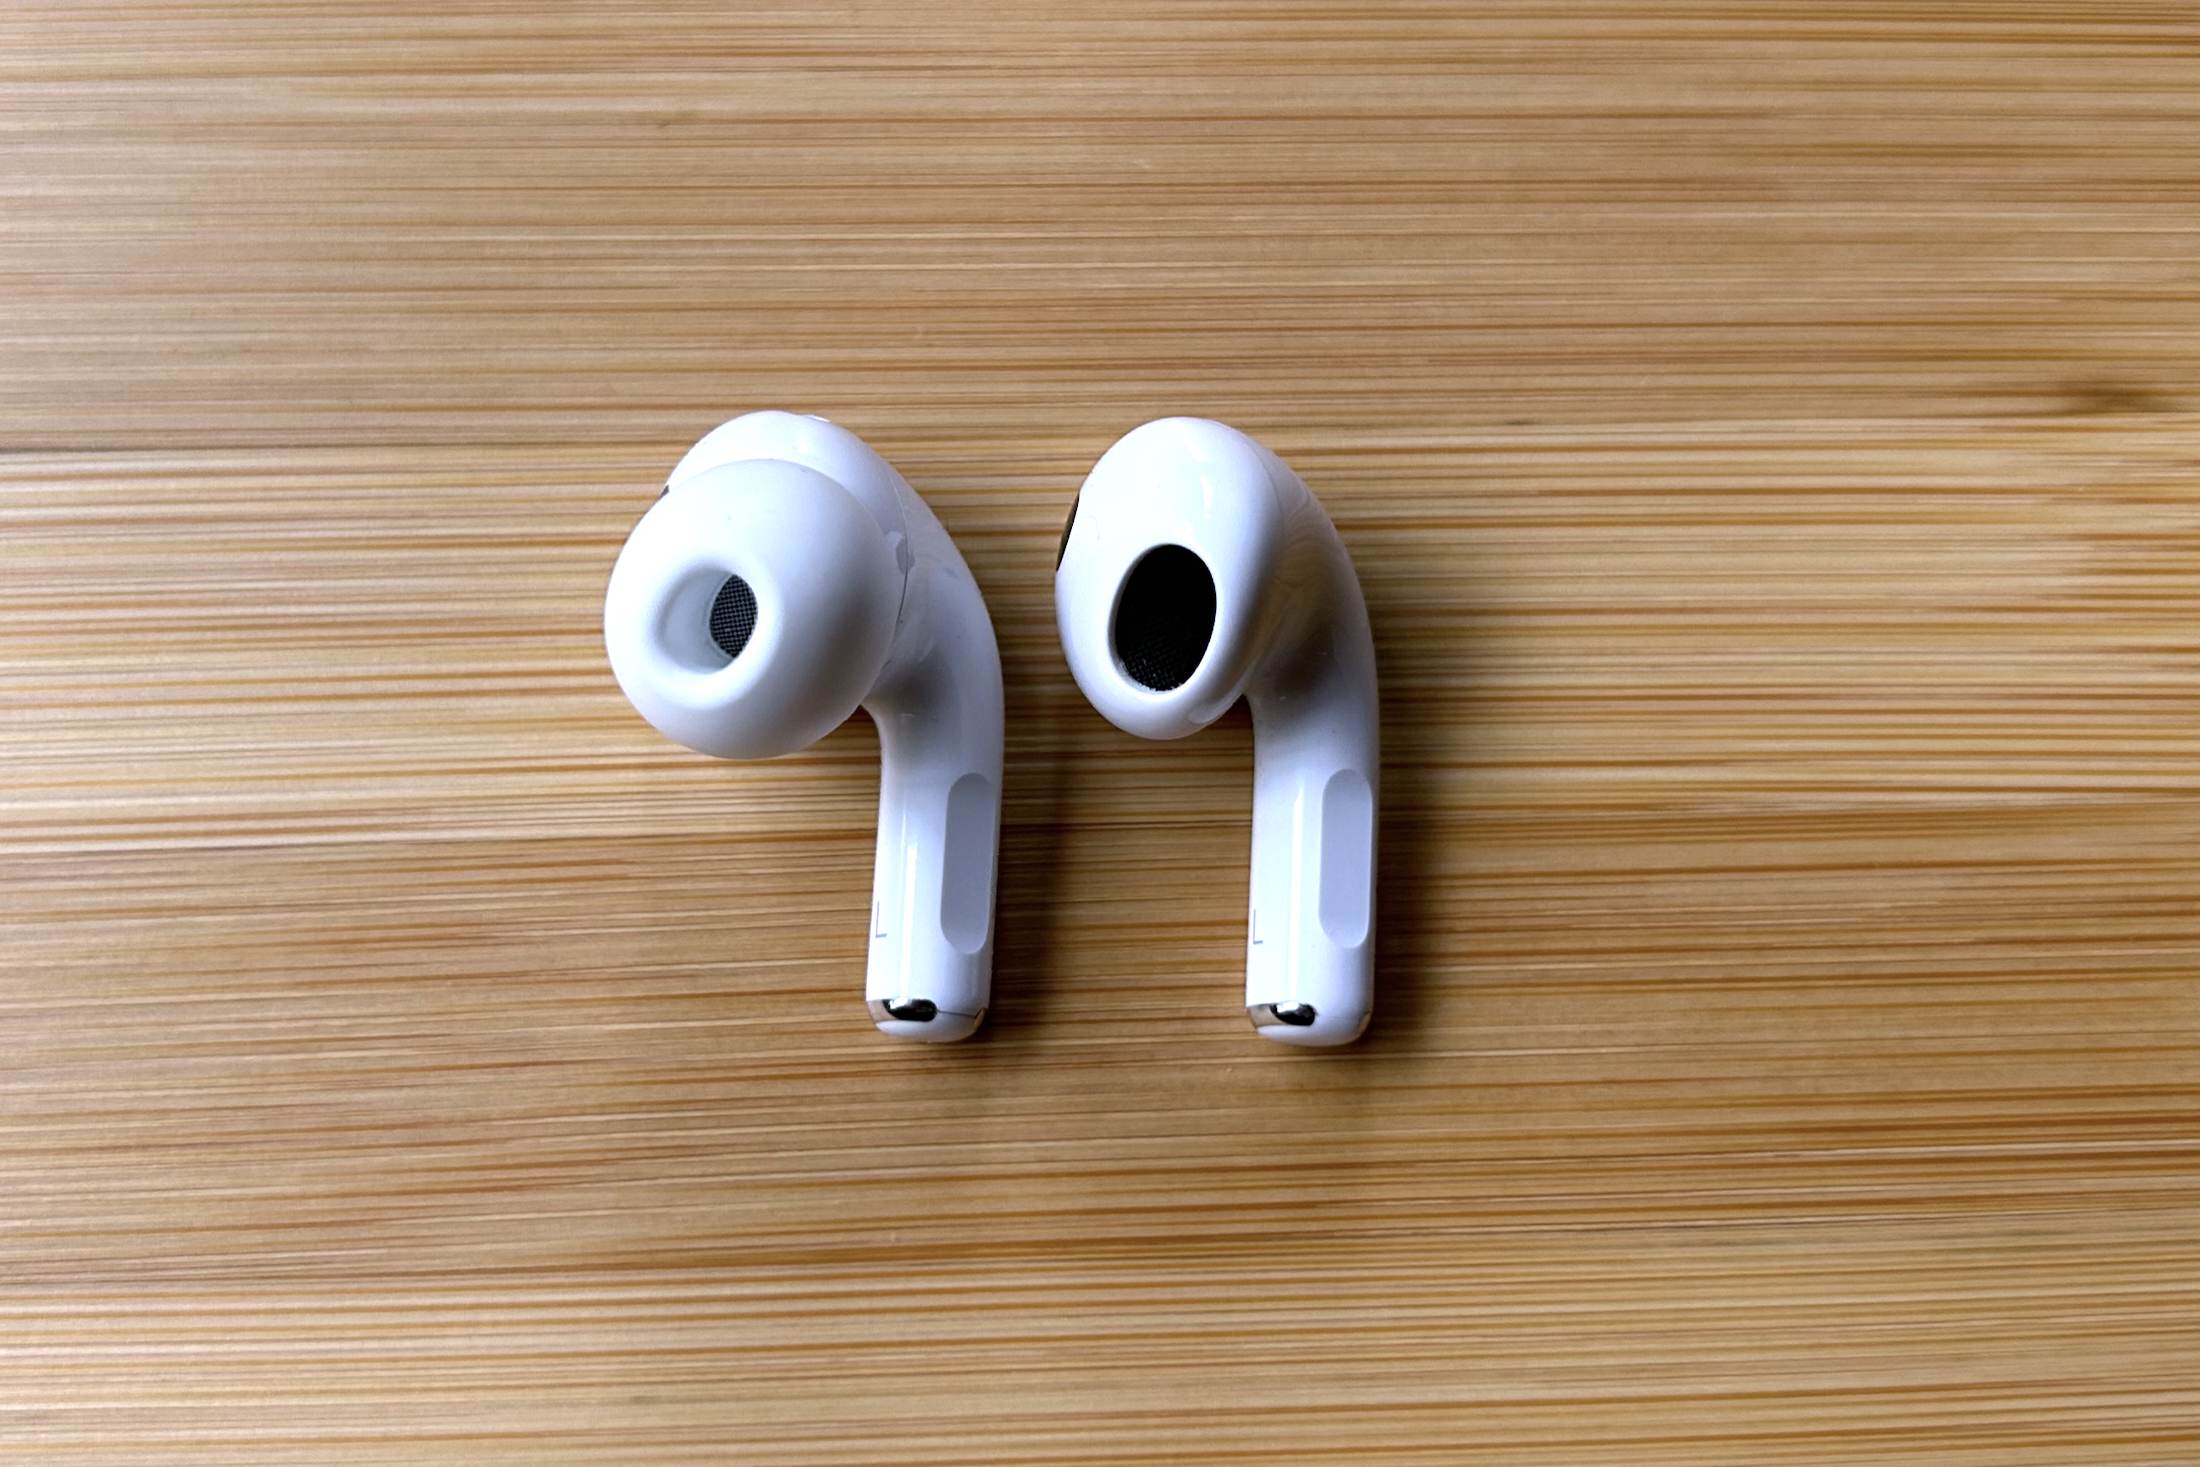 Compared: New AirPods vs second-generation AirPods